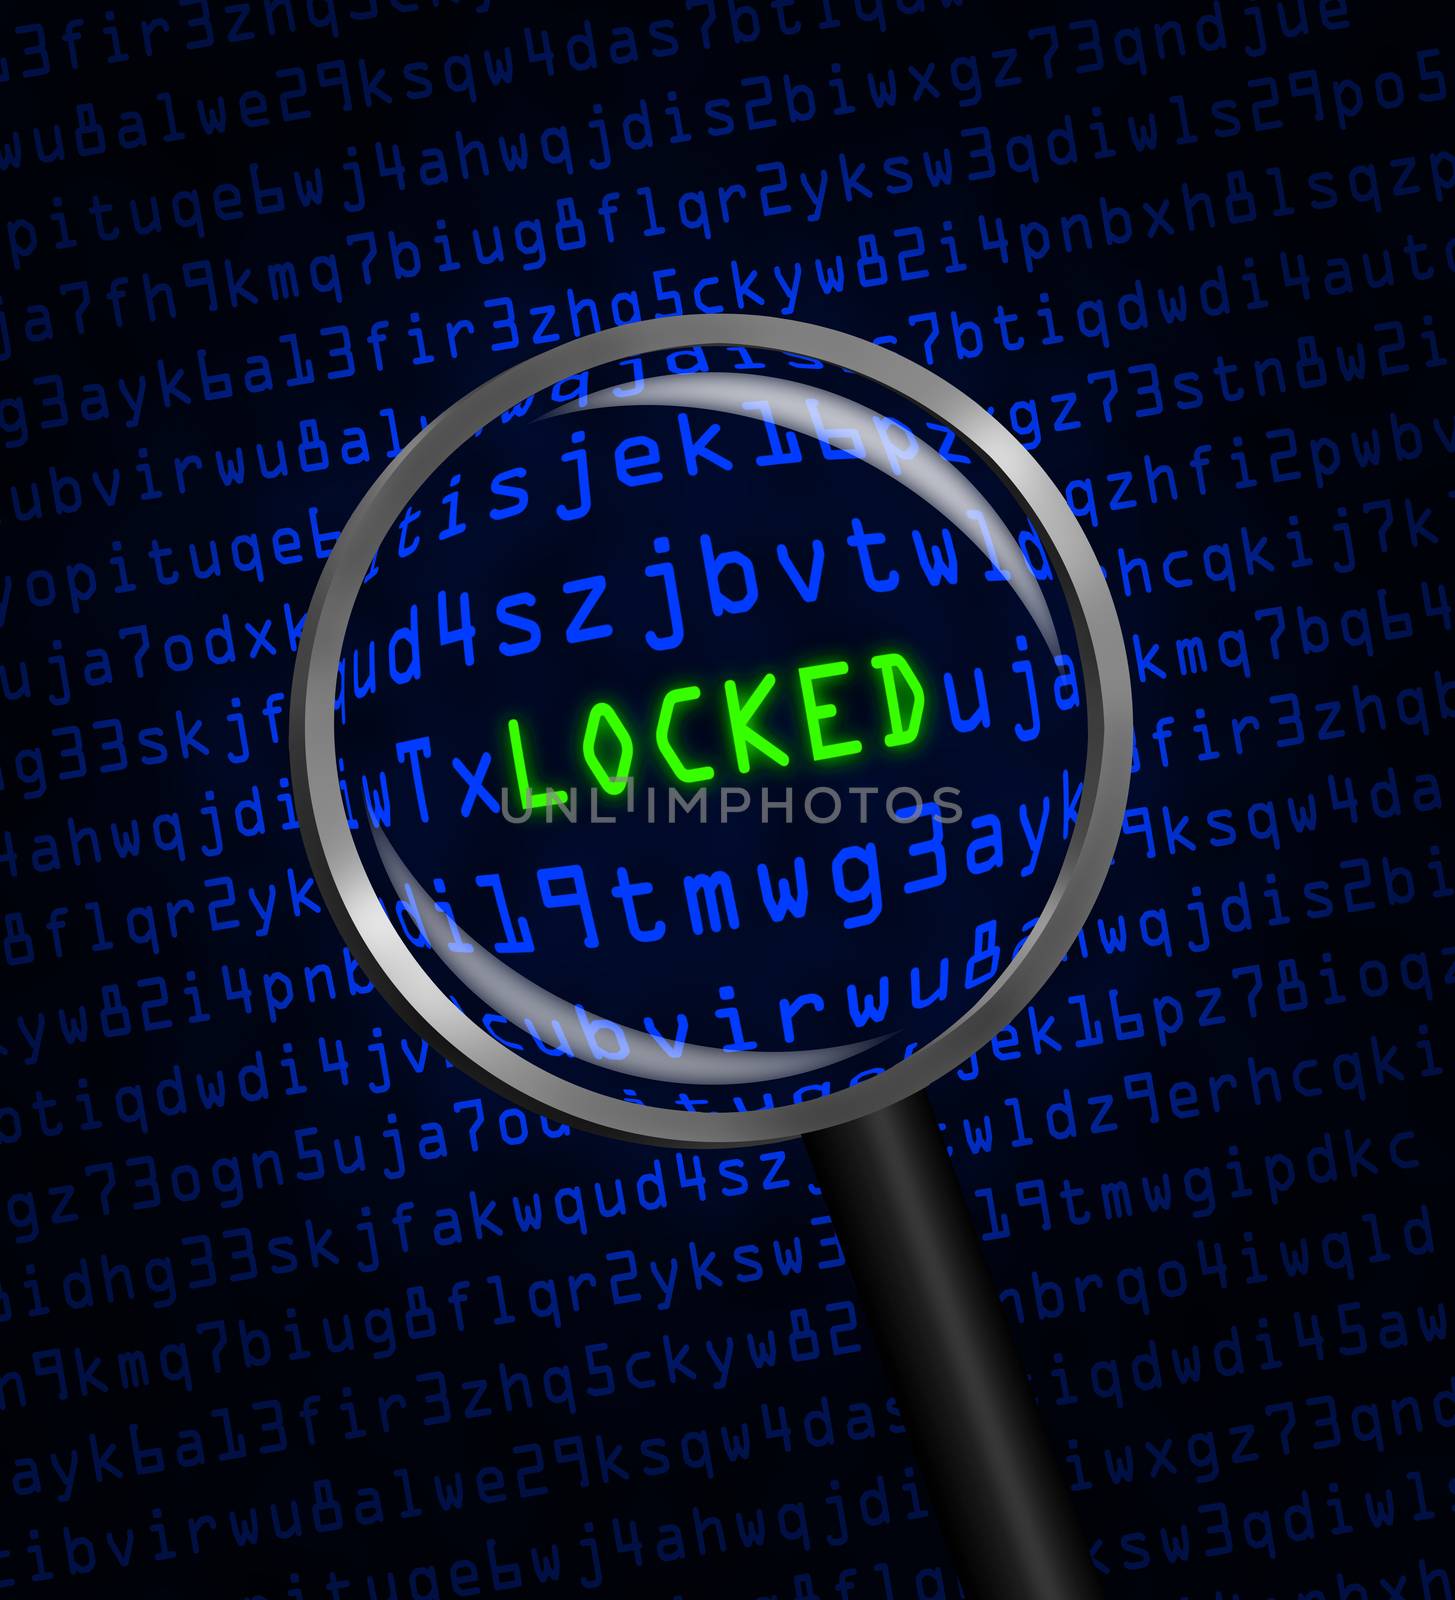 "LOCKED" revealed in computer code through a magnifying glass by Balefire9